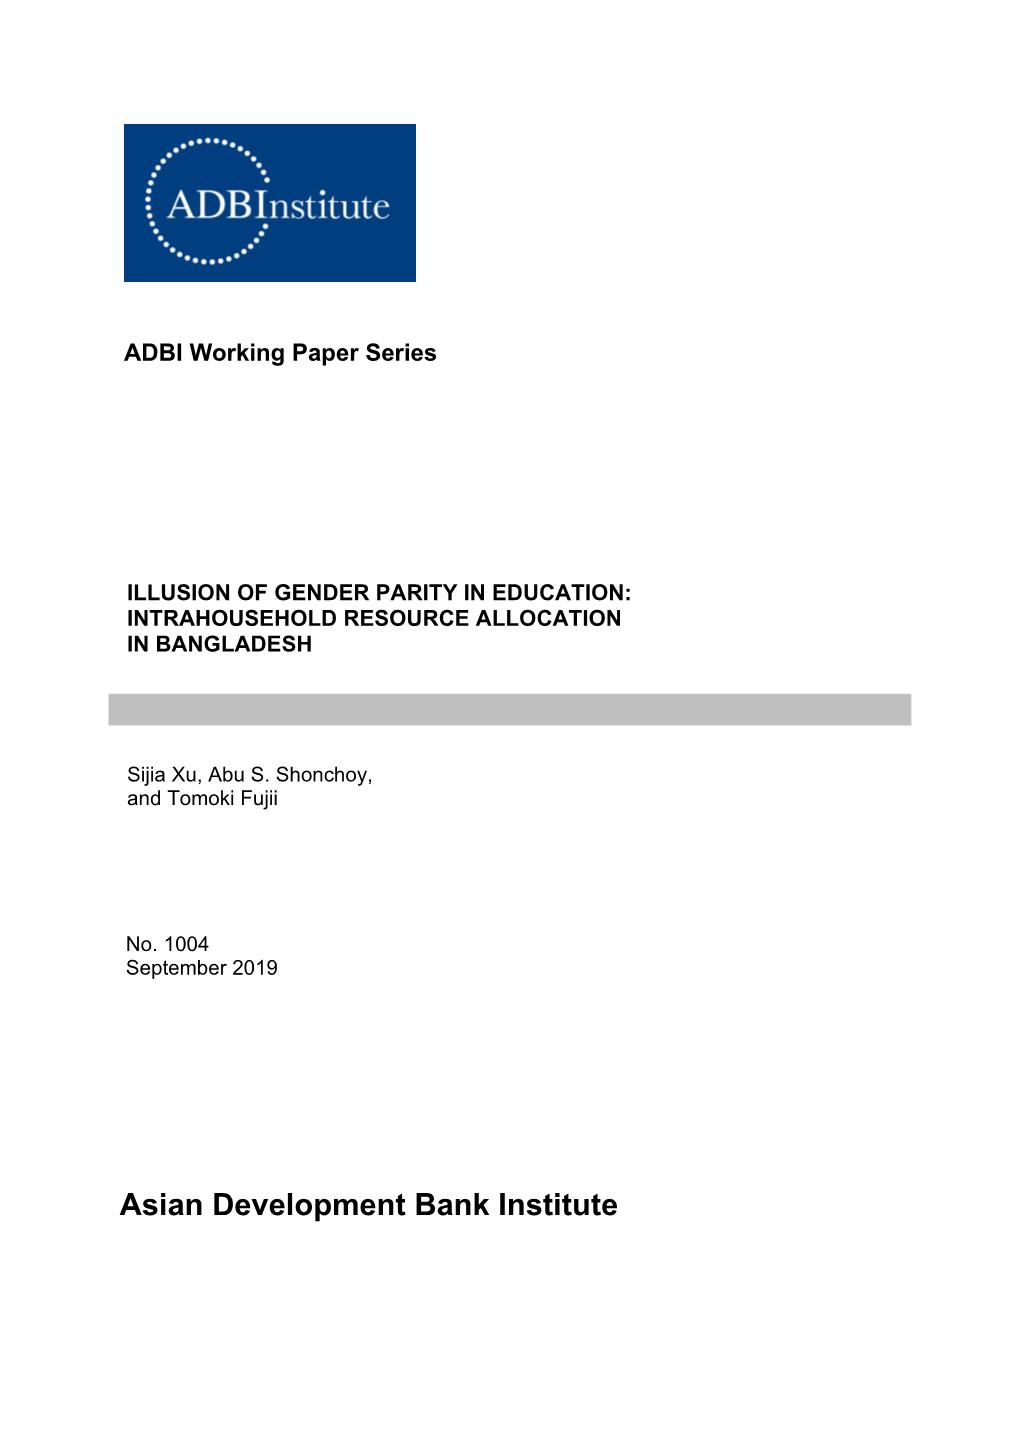 Illusion of Gender Parity in Education: Intrahousehold Resource Allocation in Bangladesh